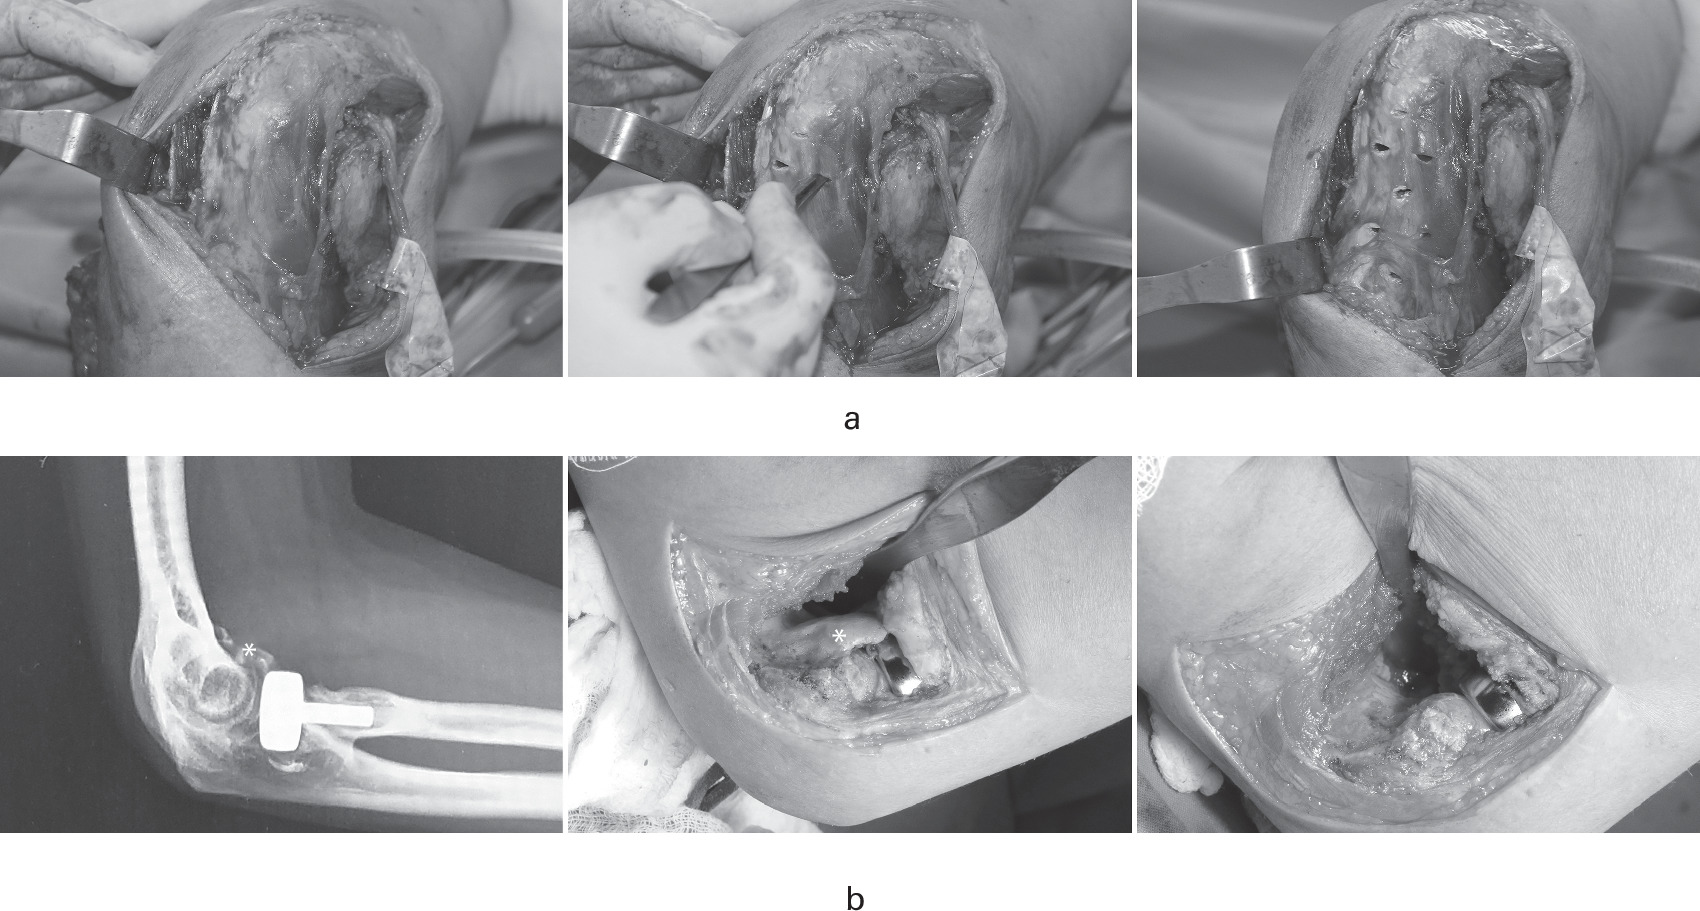 Fig. 2 
          The management of tethers and blocks in open elbow arthrolysis. a) Posterior tether release: contracted triceps pie-crusting technique. Multiple stab incisions are made in the triceps tendon in the medial-to-lateral and distal-to-proximal directions. b) Removal of an anterior block: radiograph shows anterior heterotopic ossification (HO). An irregularly shaped HO (*) originating from the distal humerus can be seen anteriorly. All figures are used with permission of the owner. All rights reserved (Sun et al. Bone Jt Open. 2020;1(8):576 to 584).
        